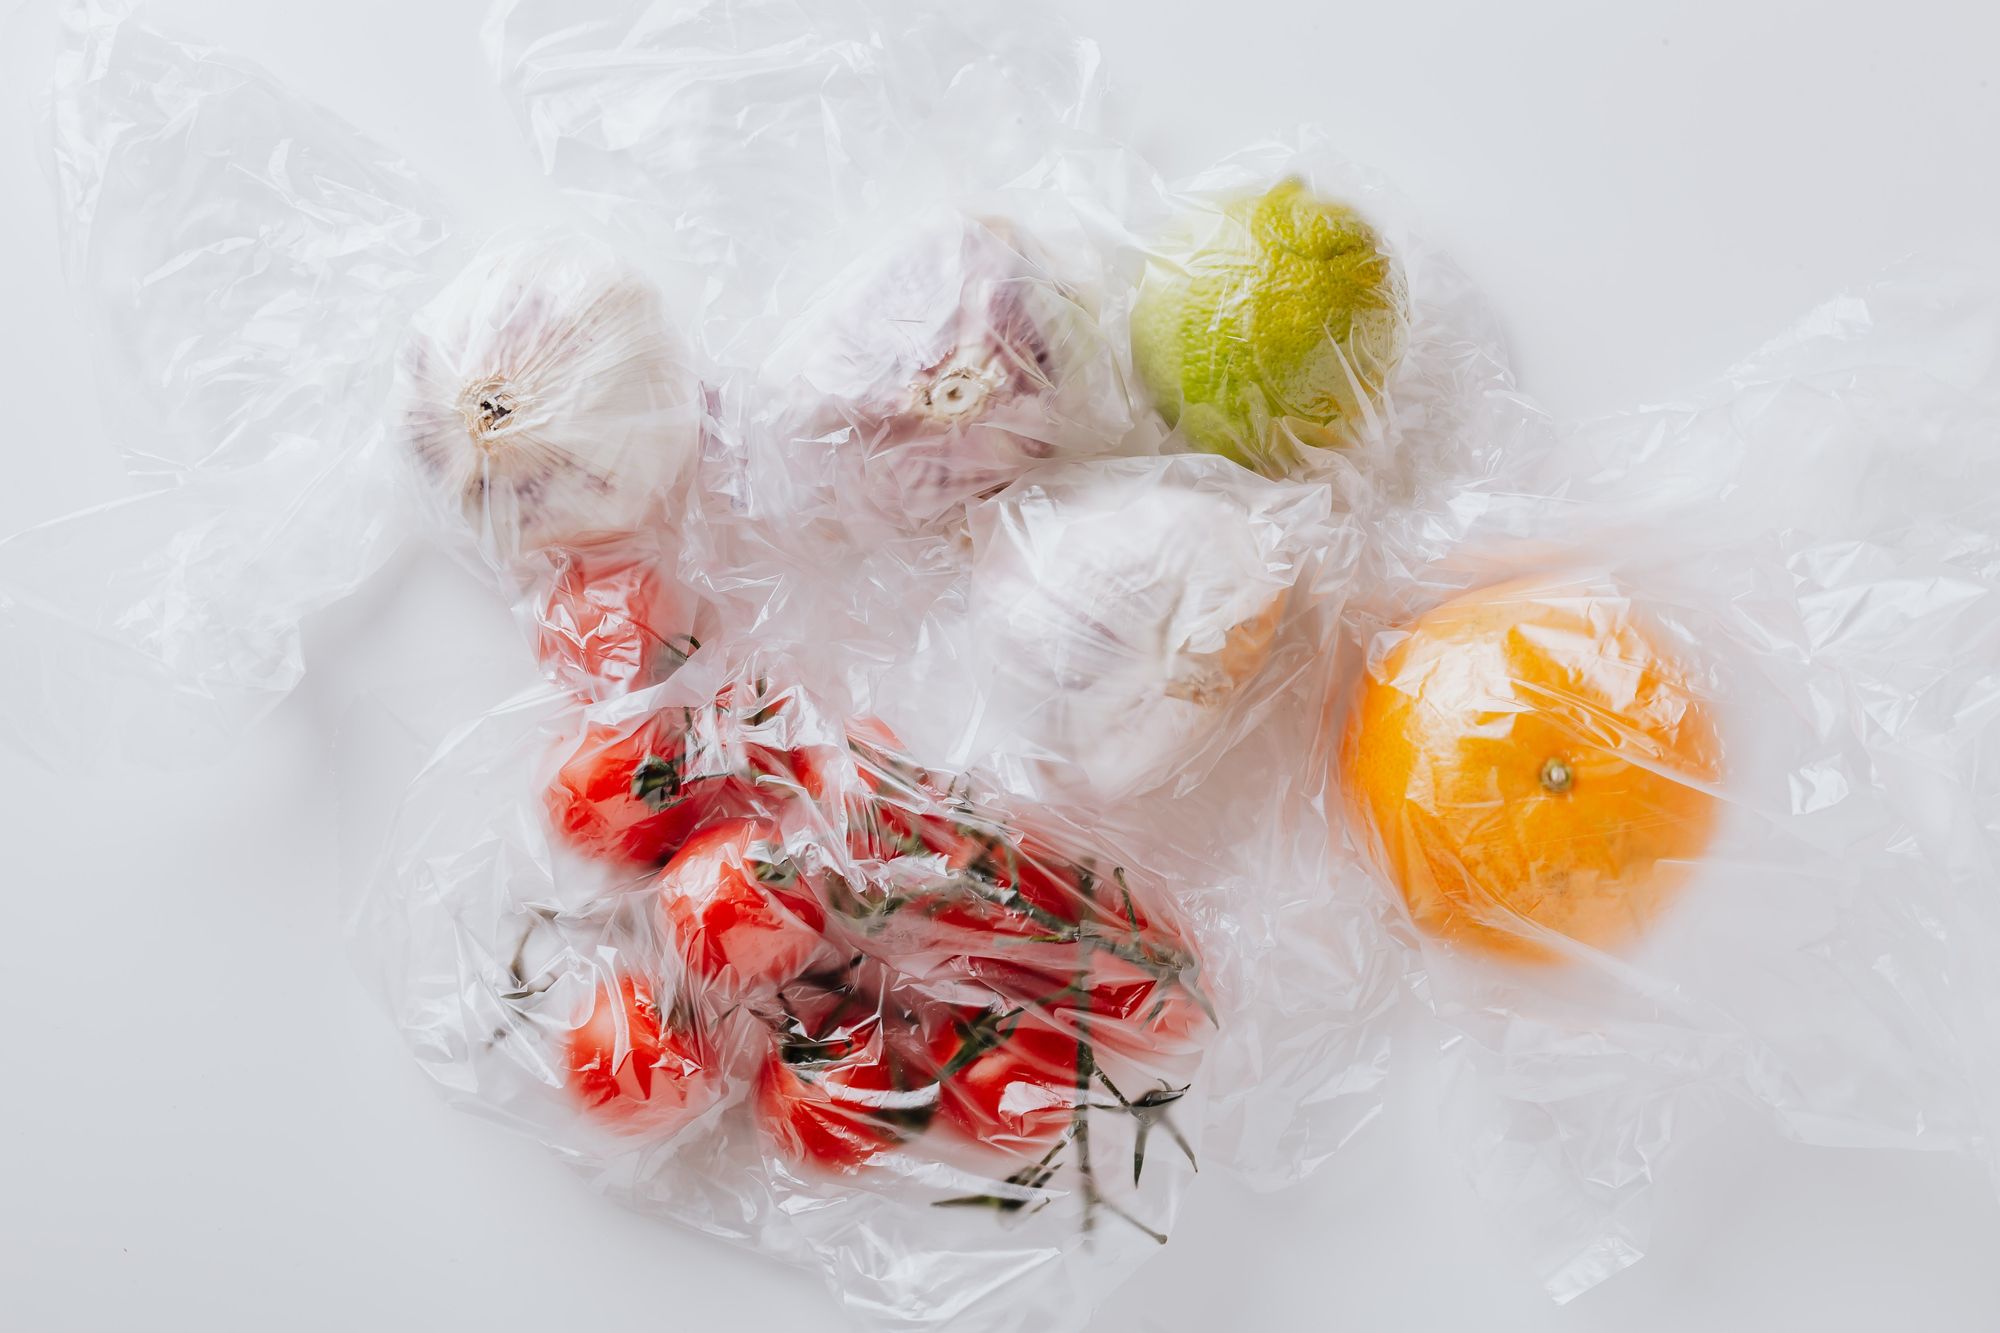 Garlic, tomatoes, lime, and an orange in plastic produce bags.